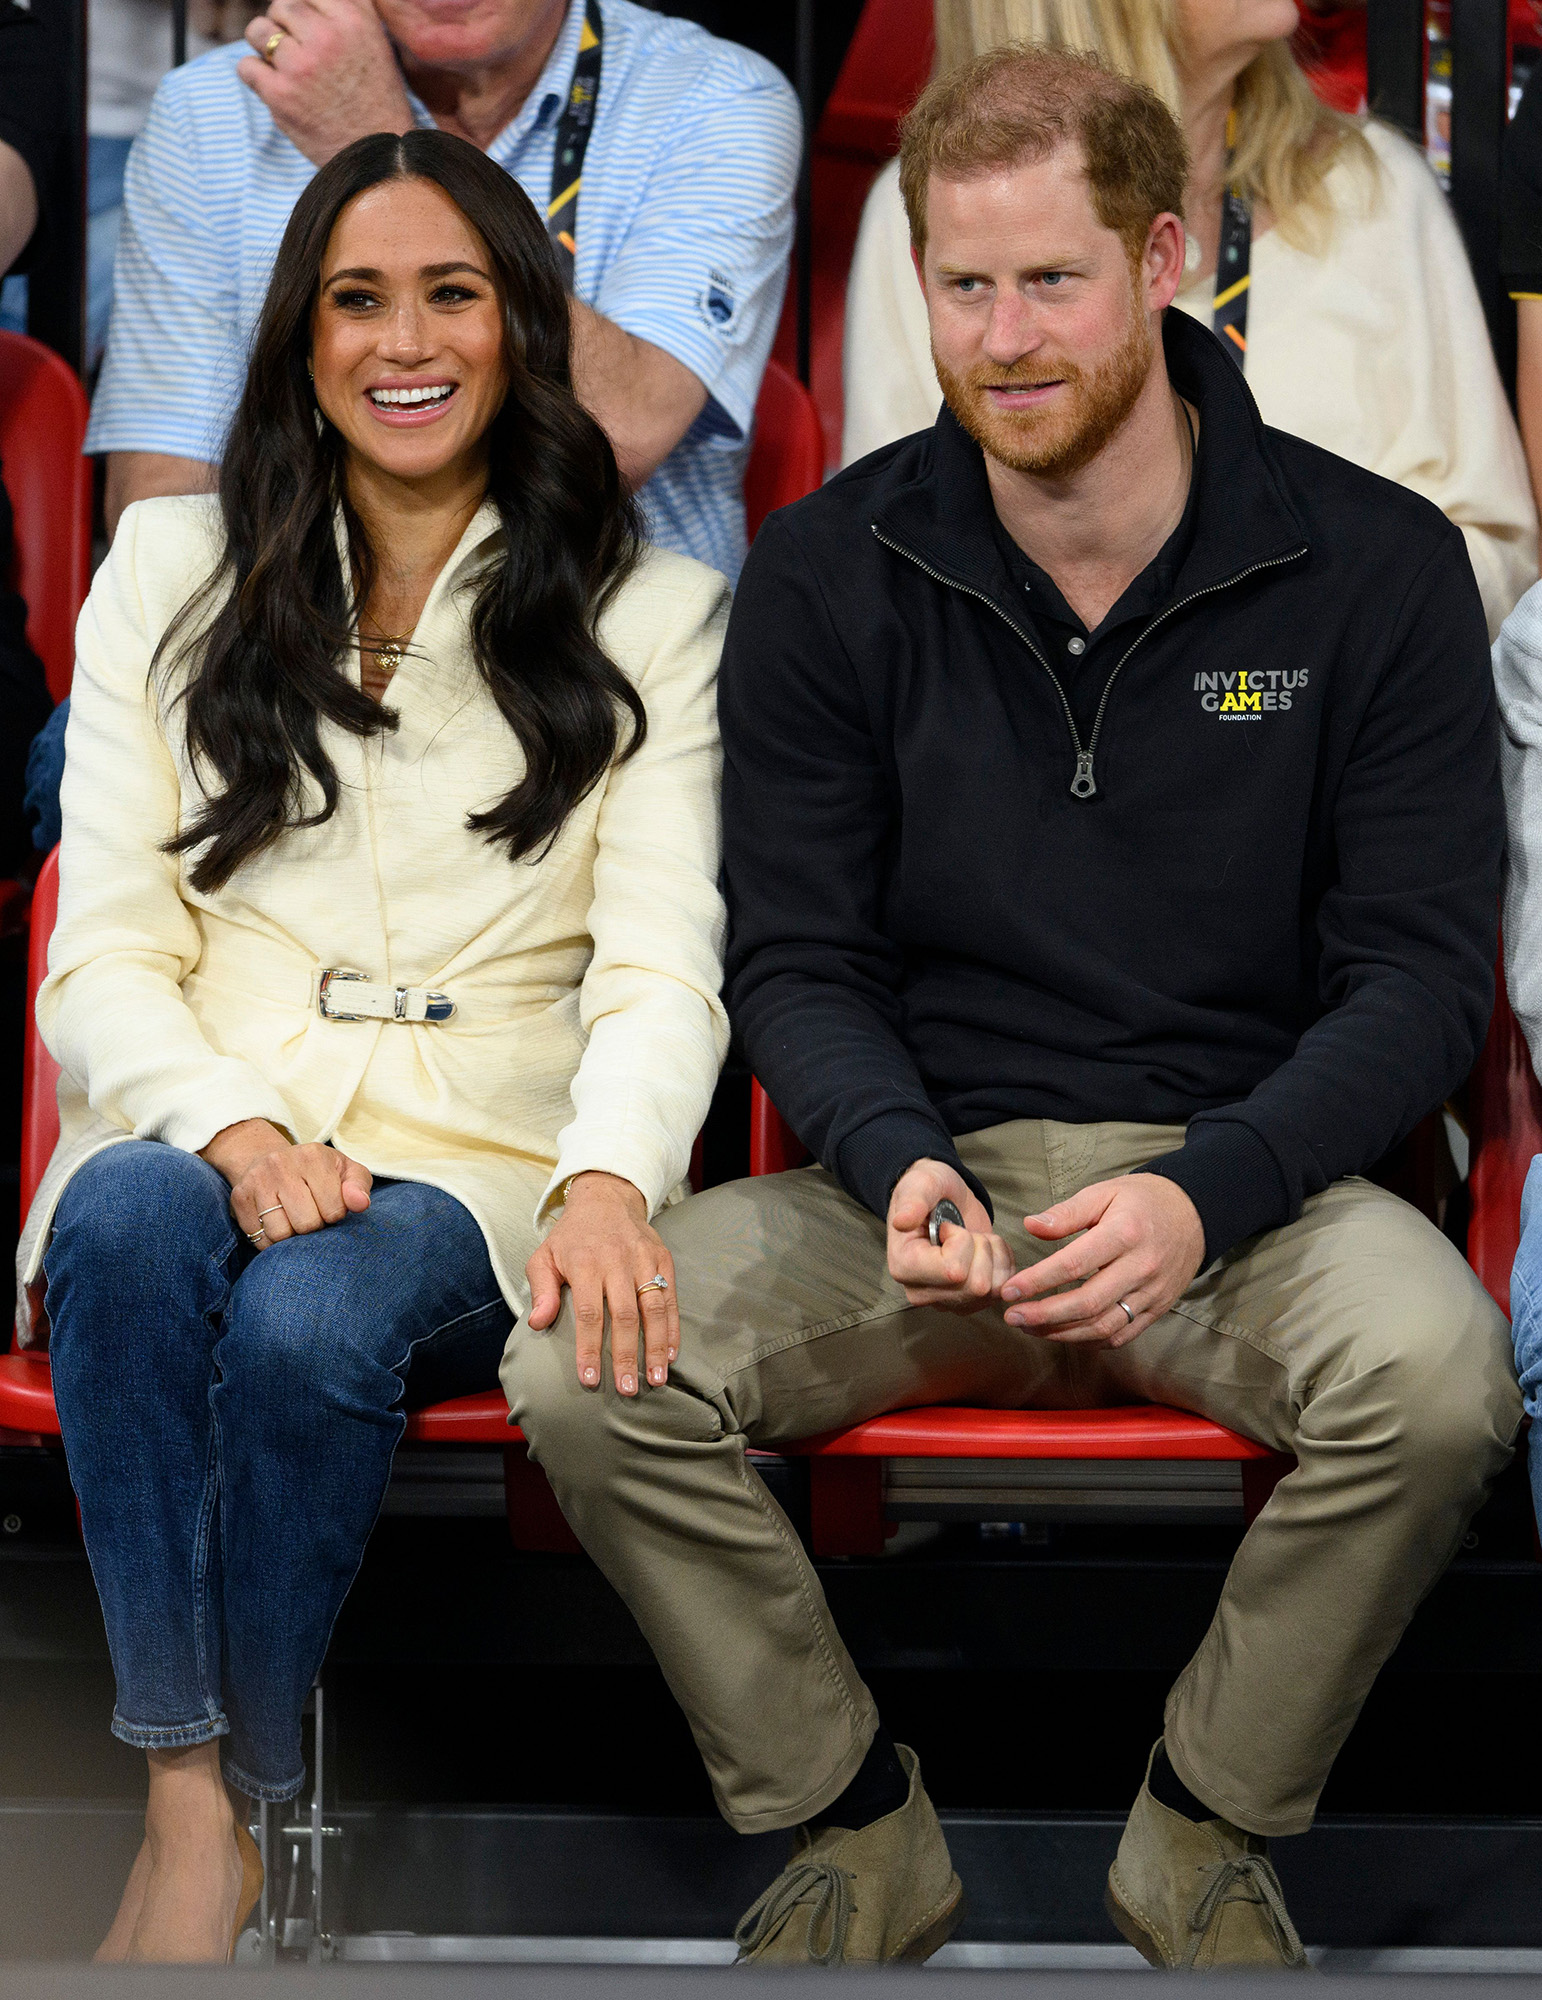 Prince Harry and Meghan Markle Are All Smiles at 2022 Invictus Games Touch